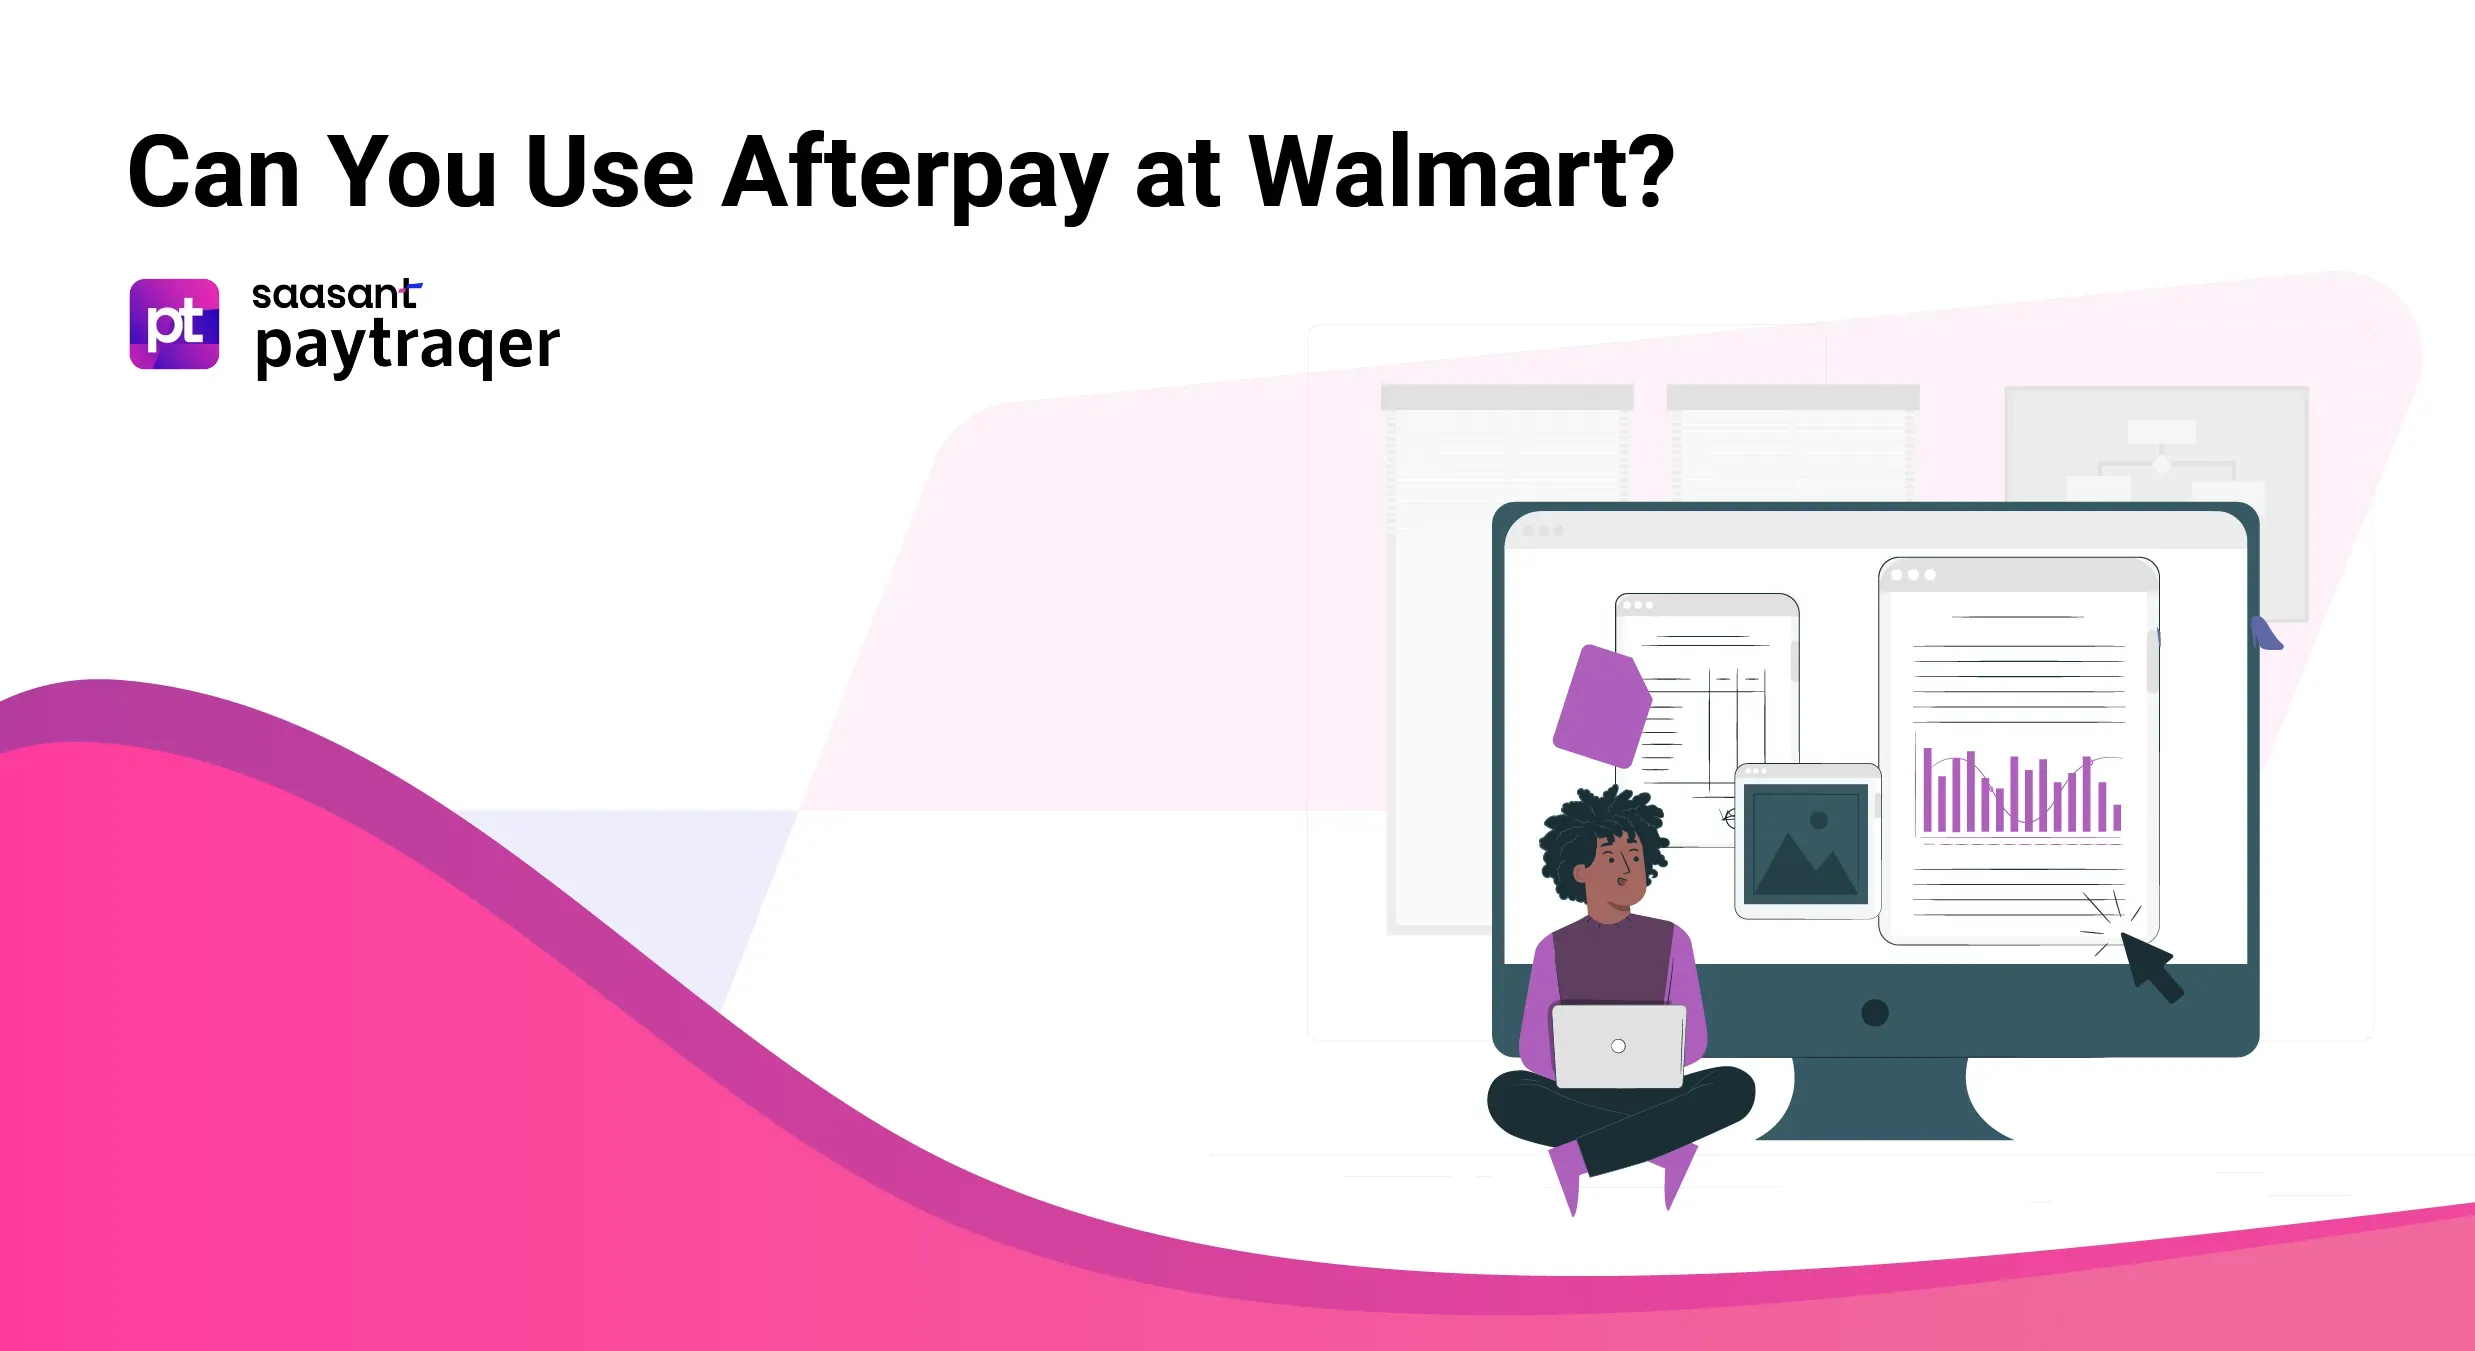 Can You Use Afterpay at Walmart